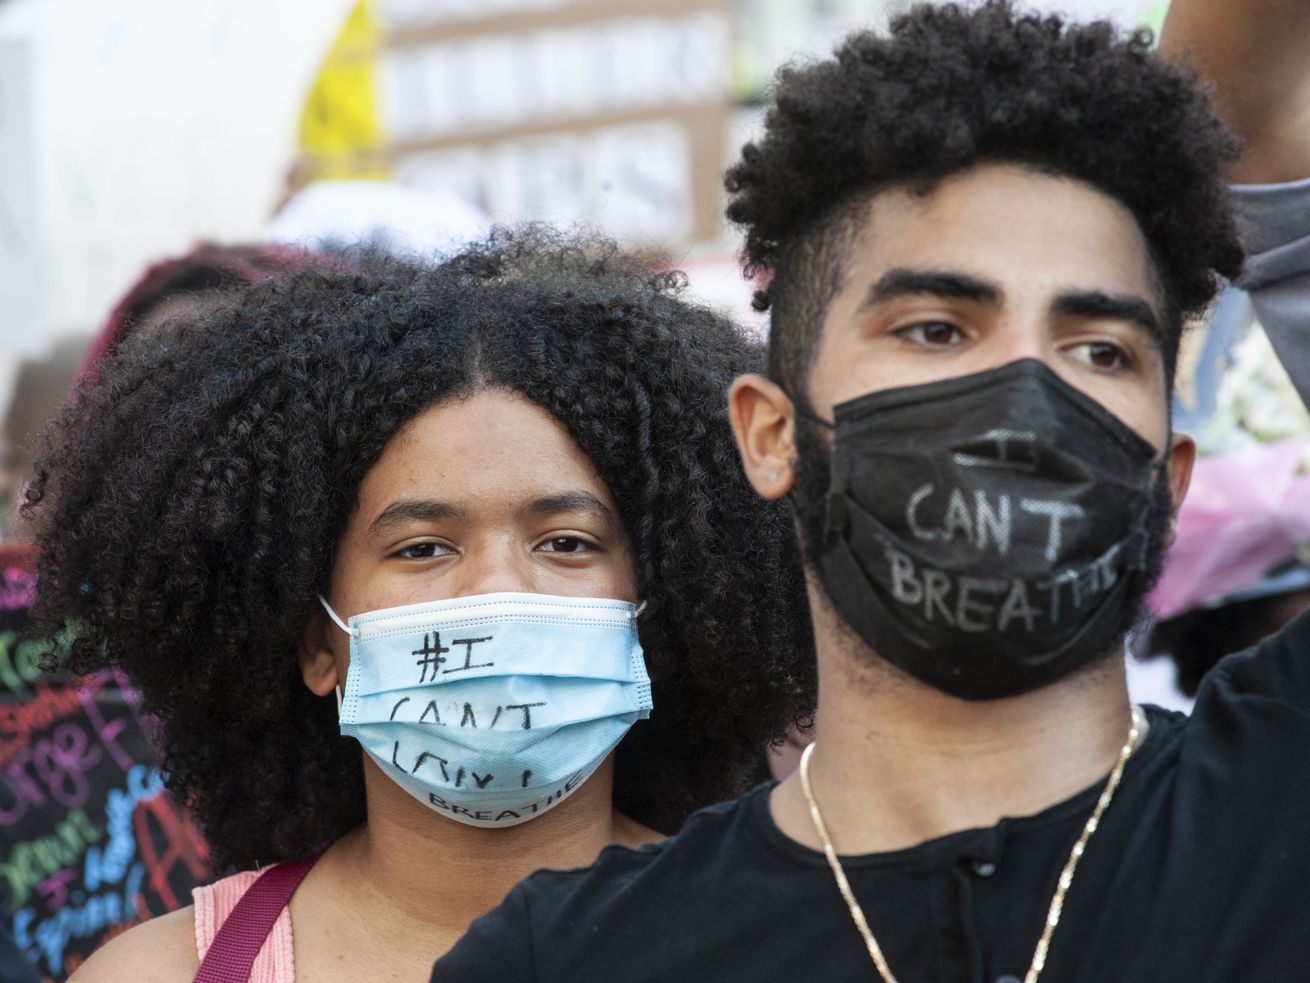 Protesters in New York on May 29 wear face masks that read “I can’t breathe.”